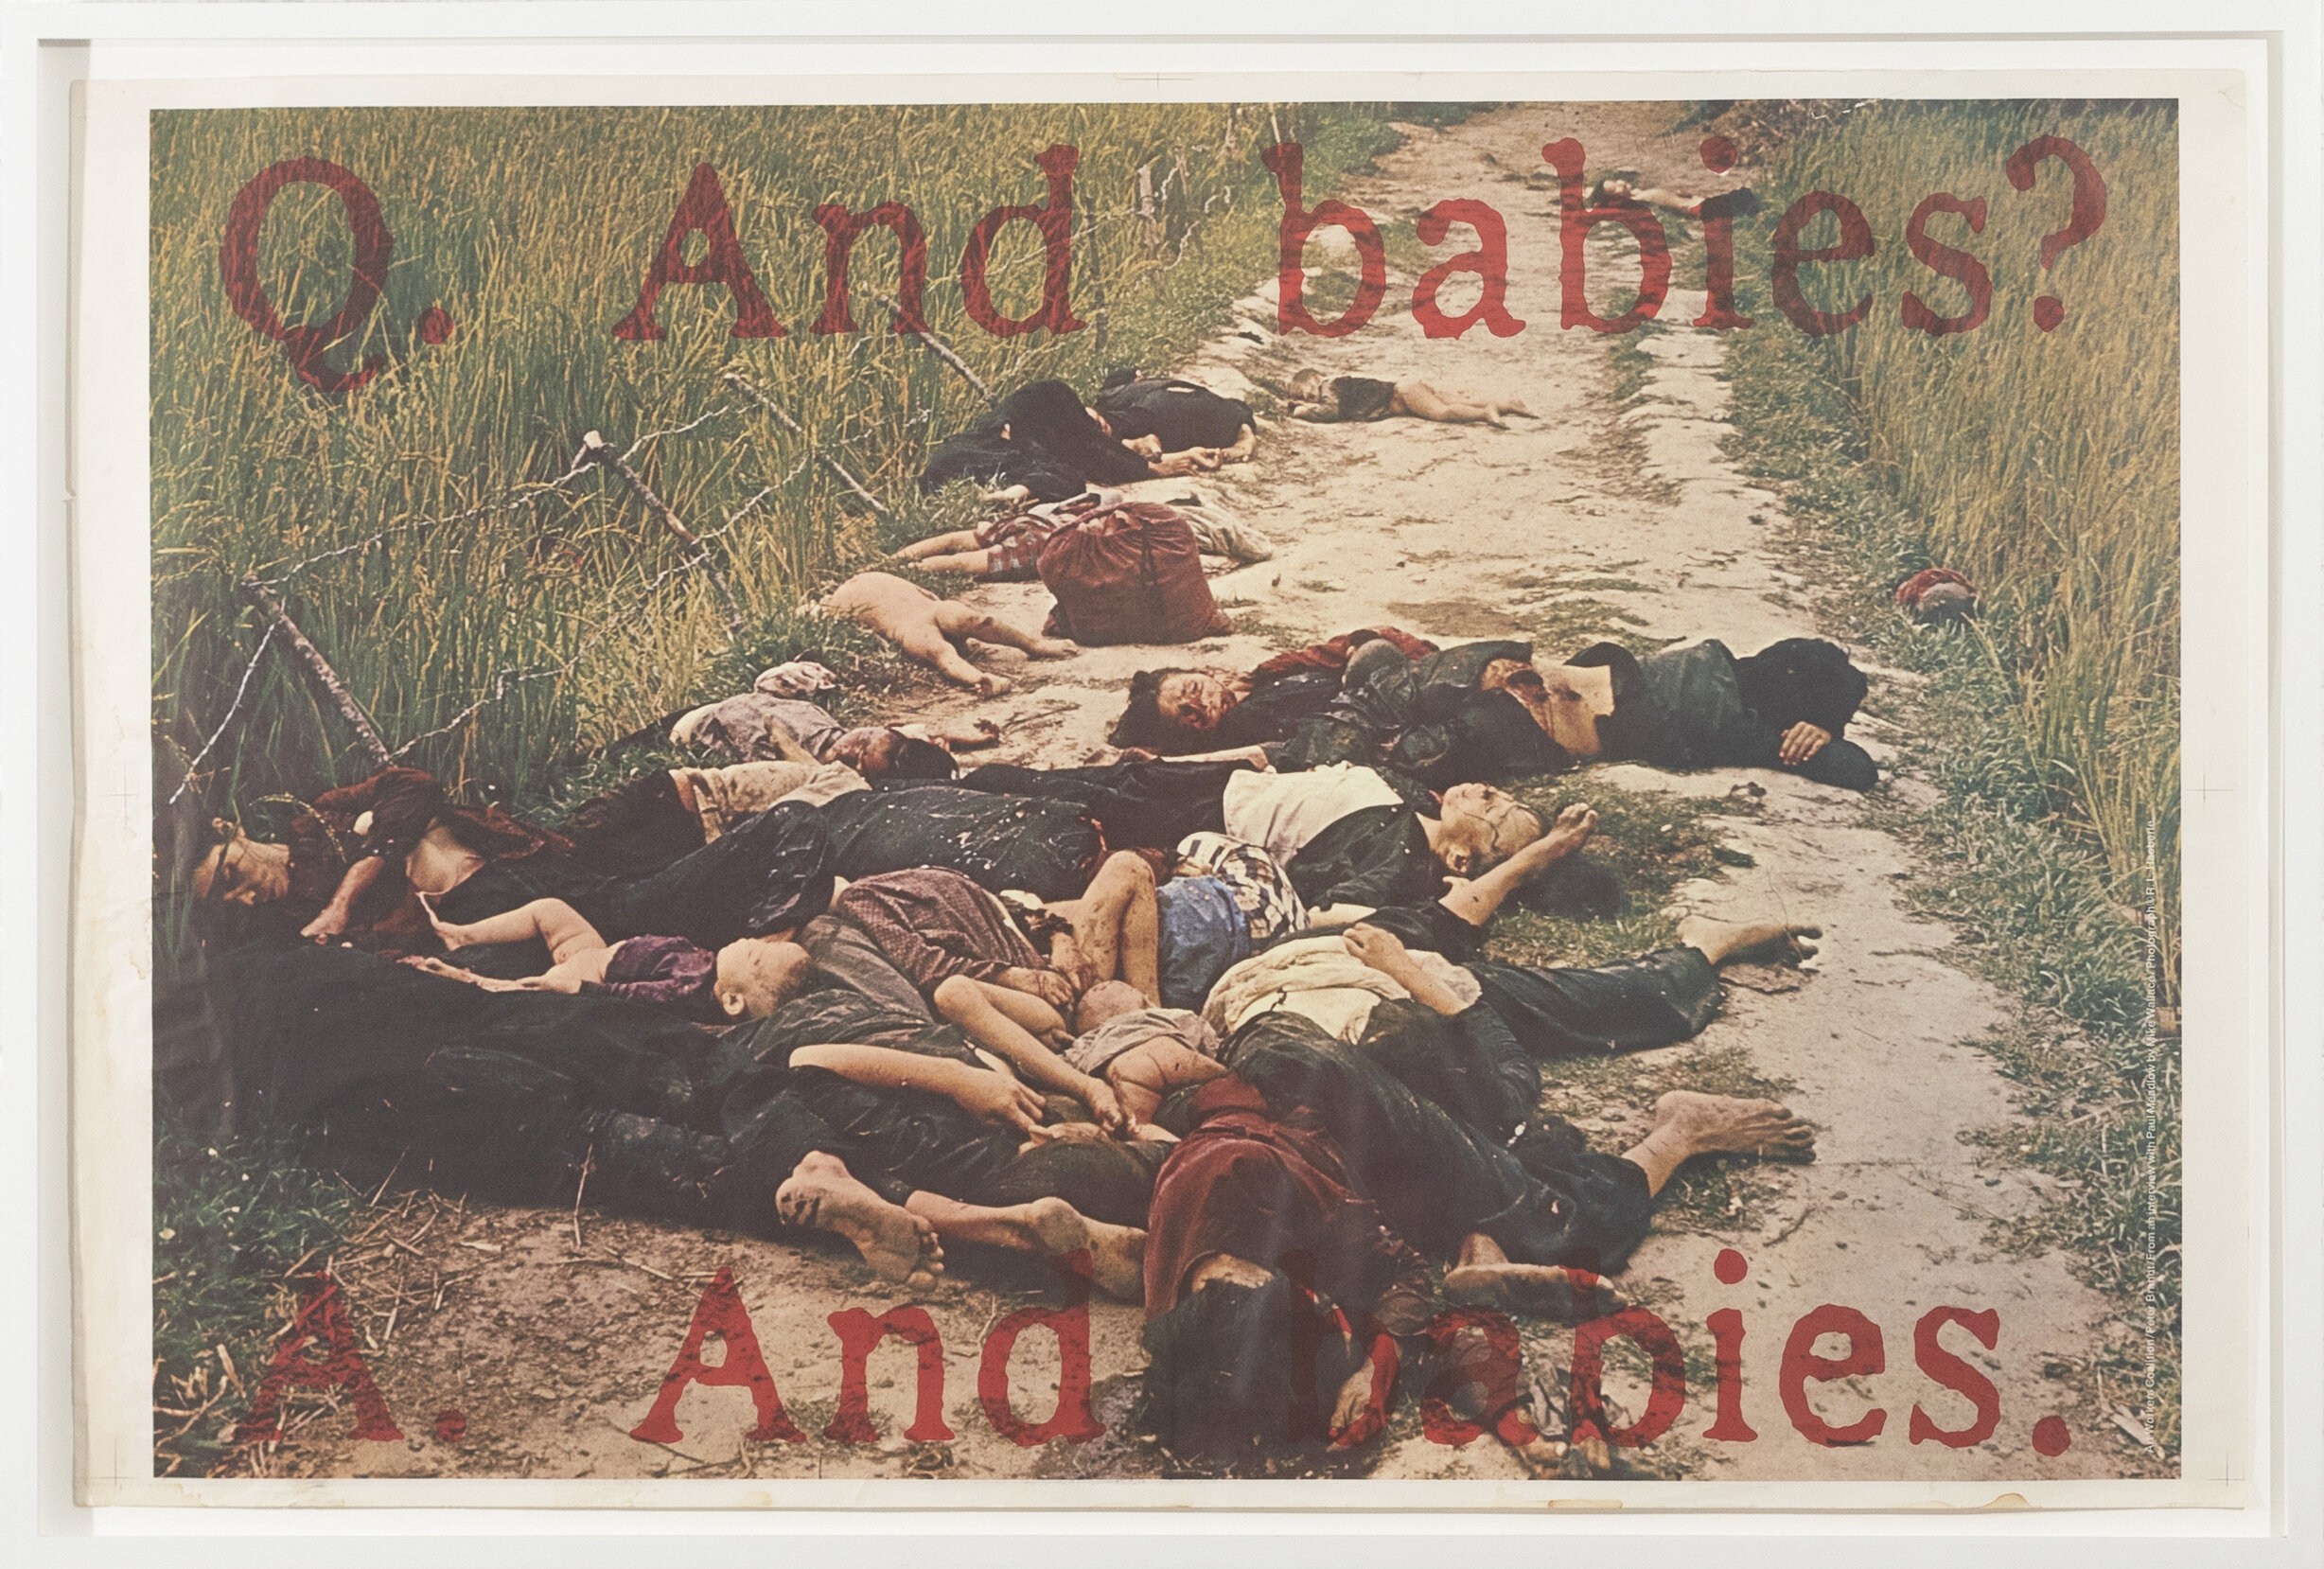 Art Workers Coalition, Q. And babies? A. And babies., 1970